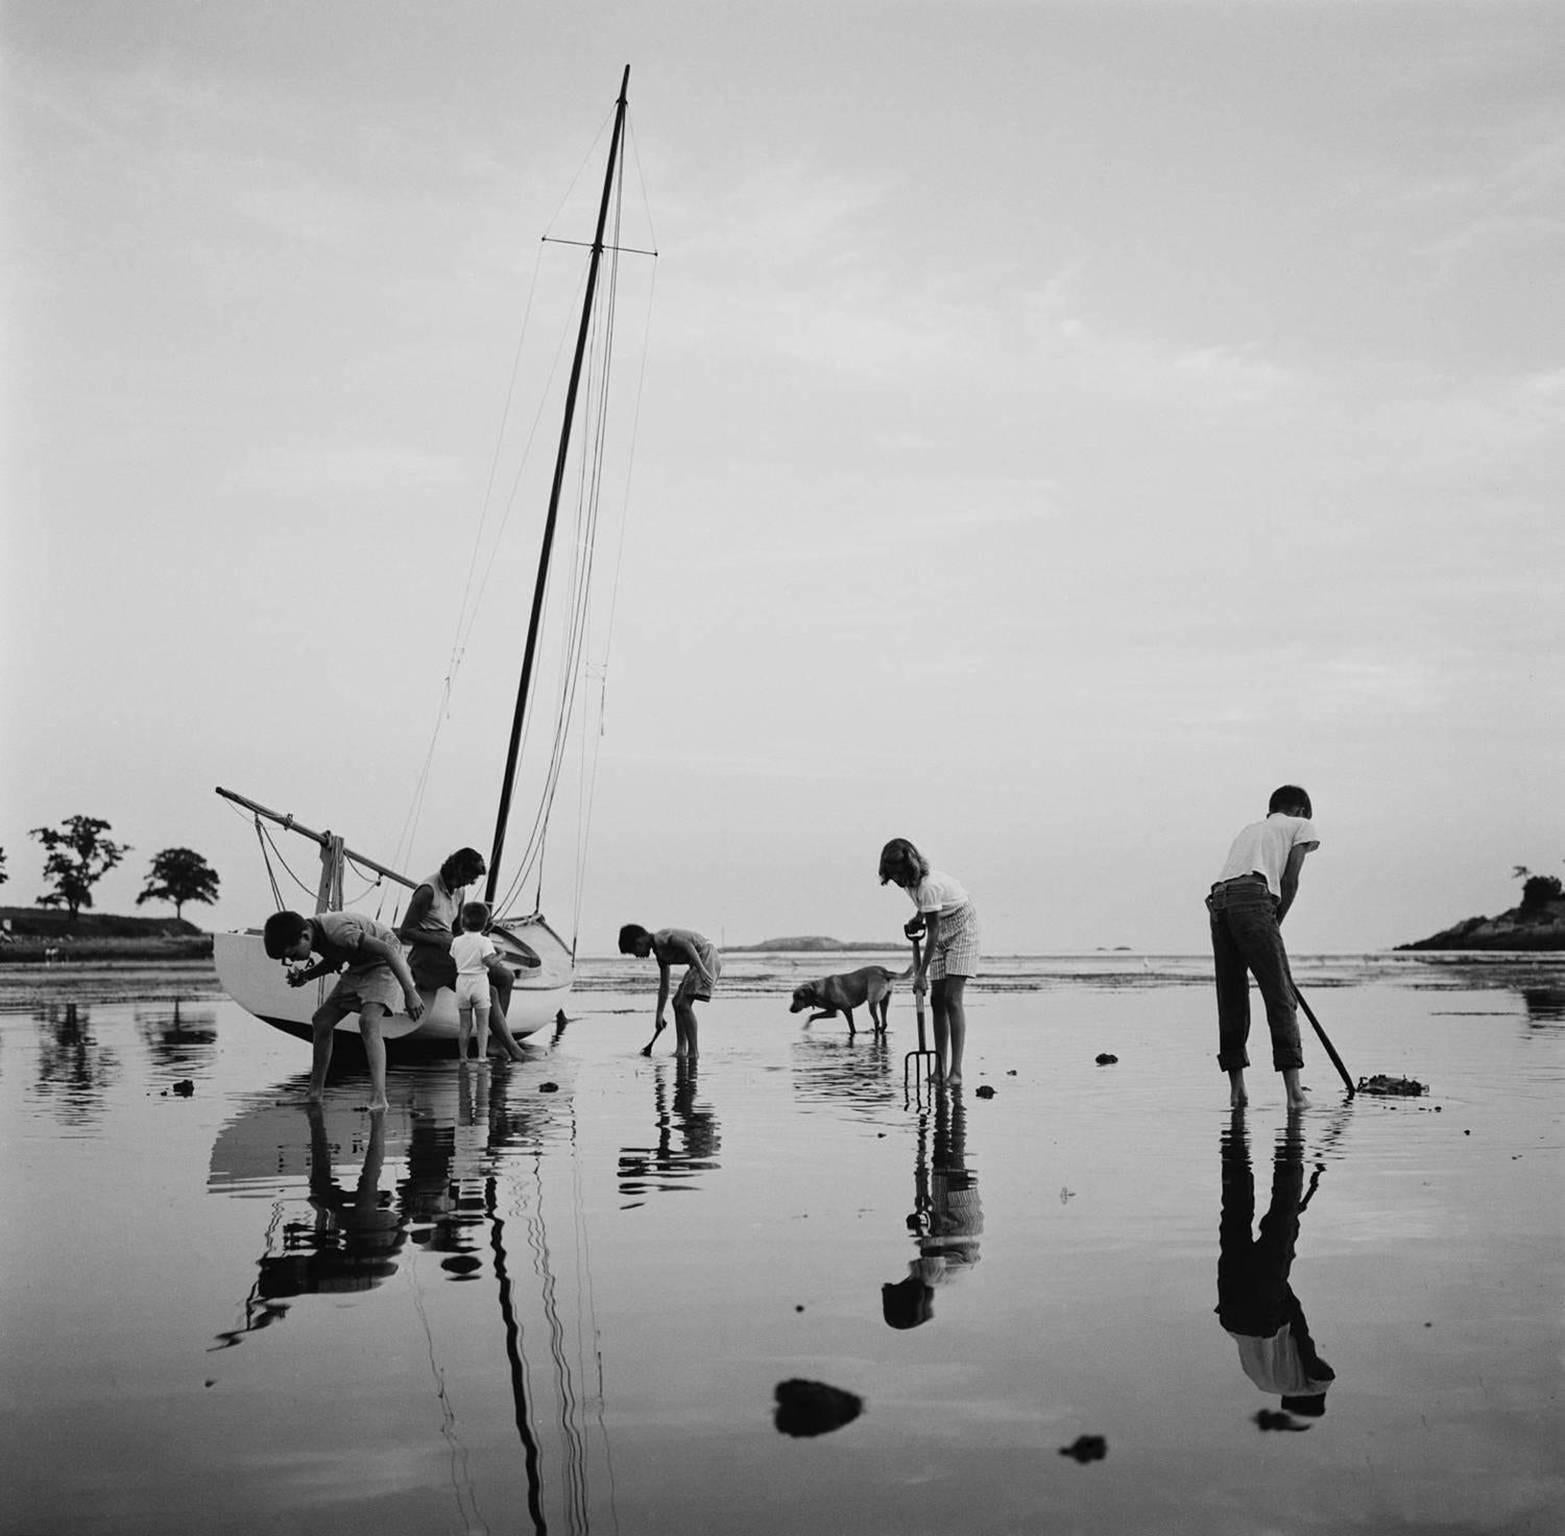 Slim Aarons
Digging for Clams on Black Beach (Slim Aarons Estate Edition), 1960
Chromogenic Lambda print

Mrs Hans Estin watches her children digging for clams at low tide on Black Beach, Massachusetts Bay, circa 1960

Estate stamped and hand